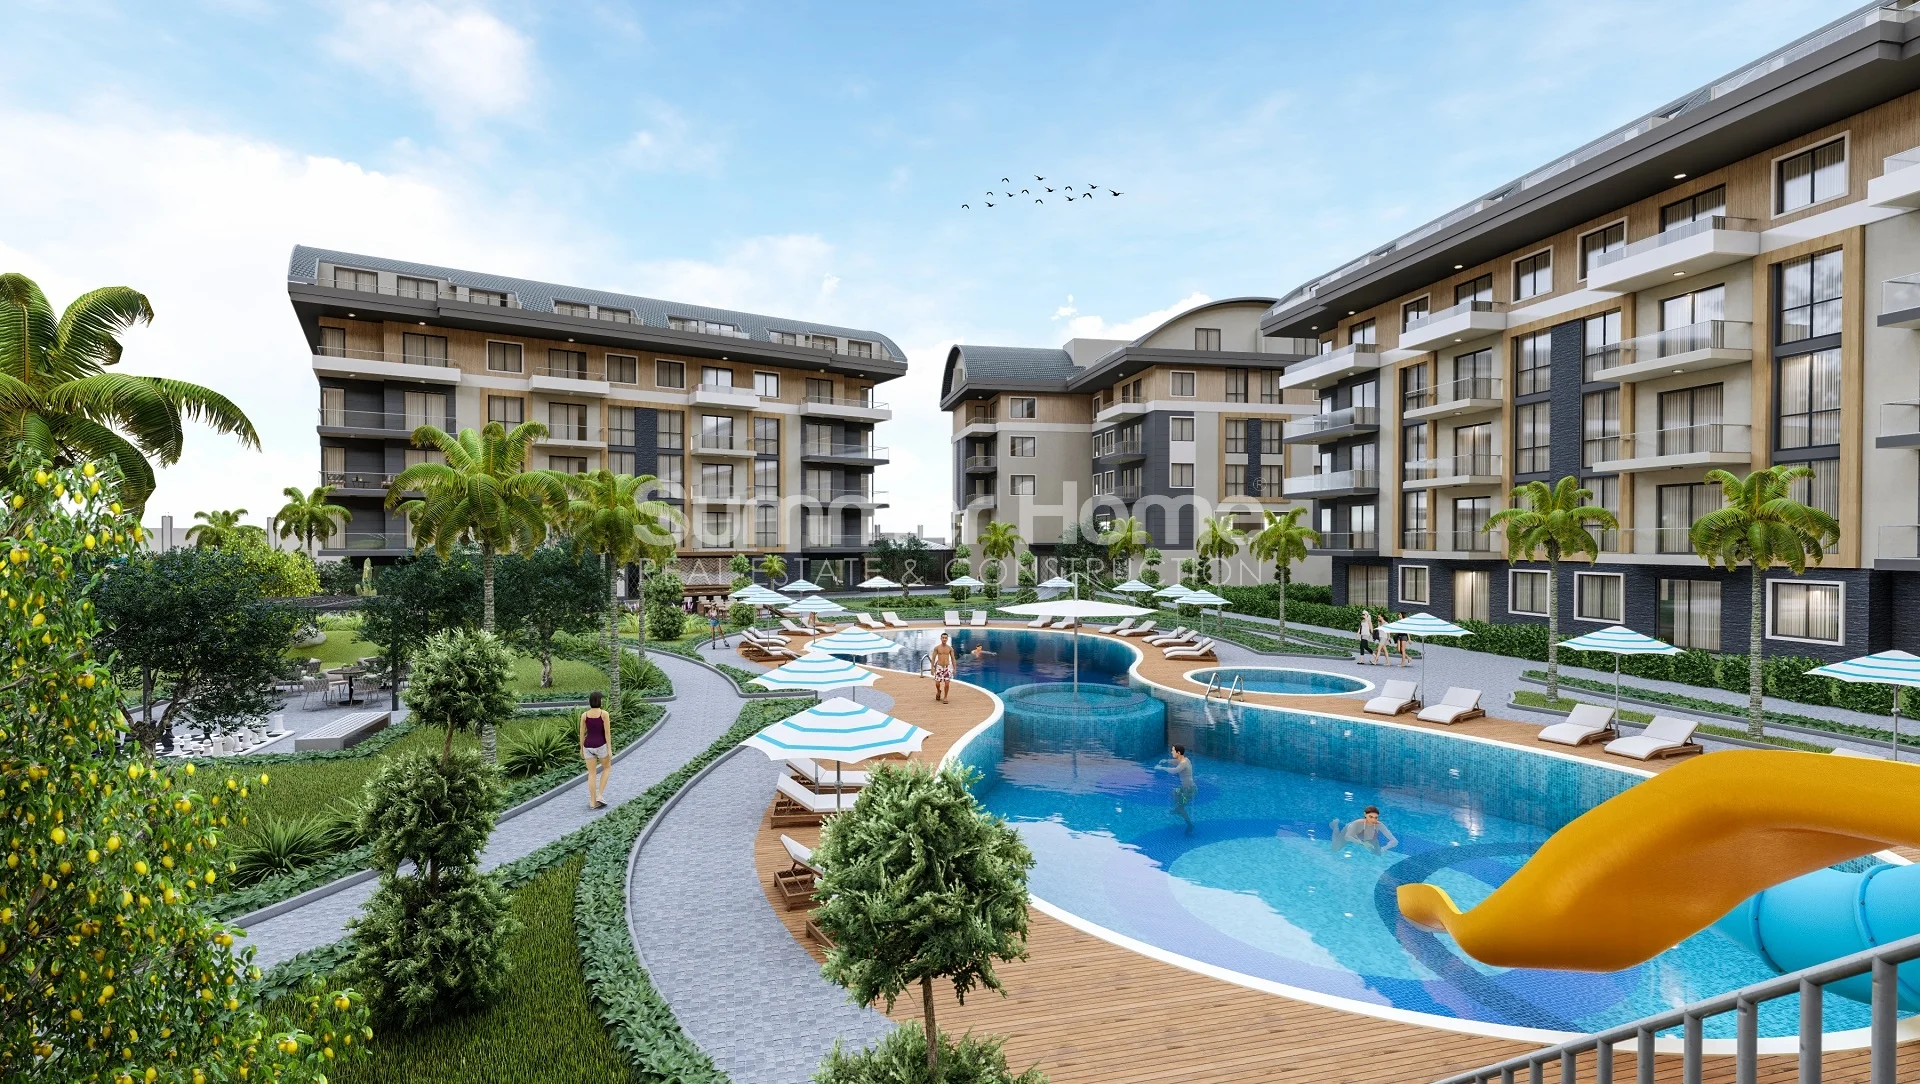 many new apartments in Oba, Alanya general - 5